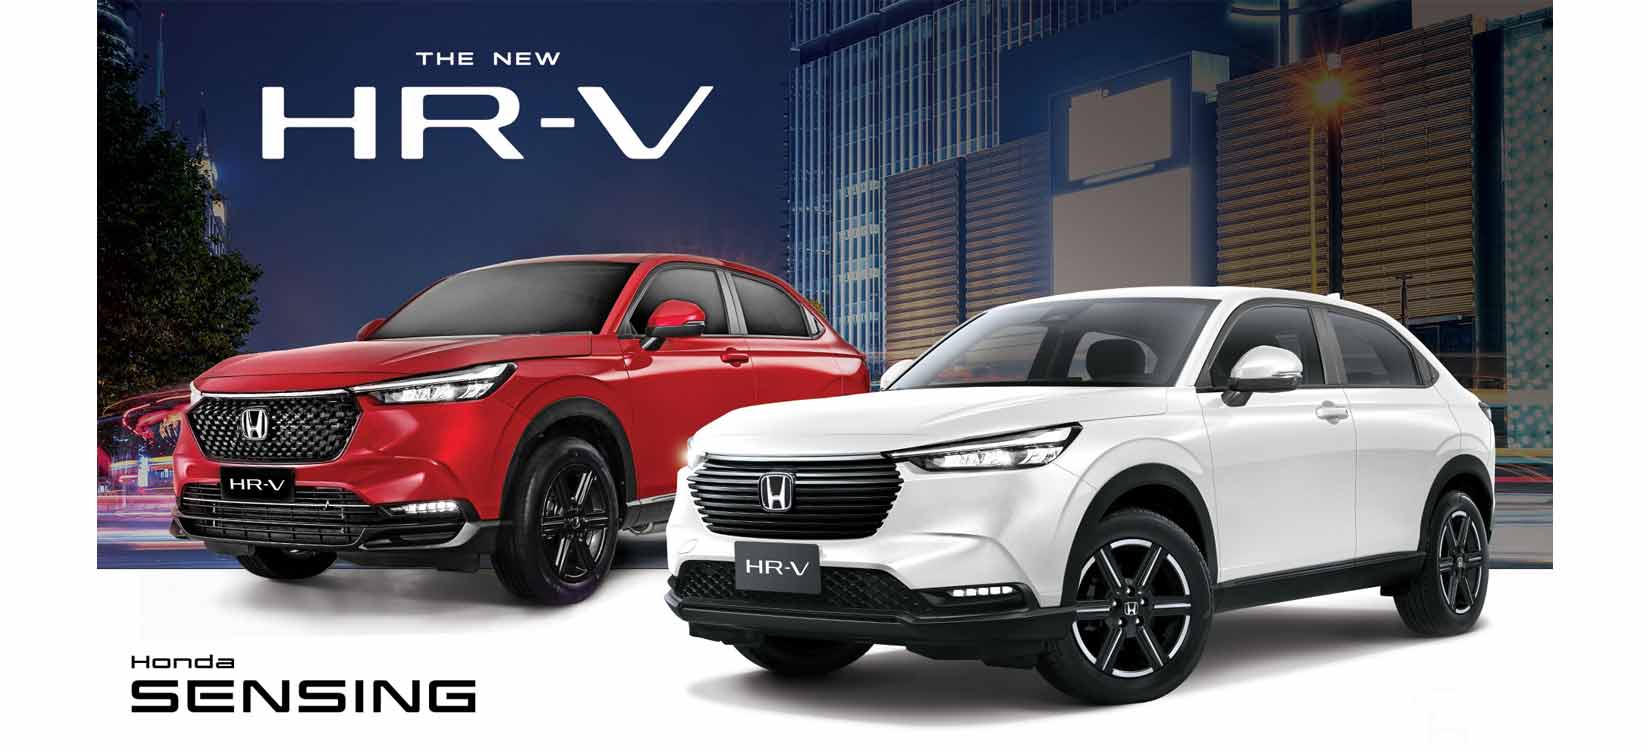 Honda Cars PH announces stable supply of the new HR-V, your next subcompact crossover